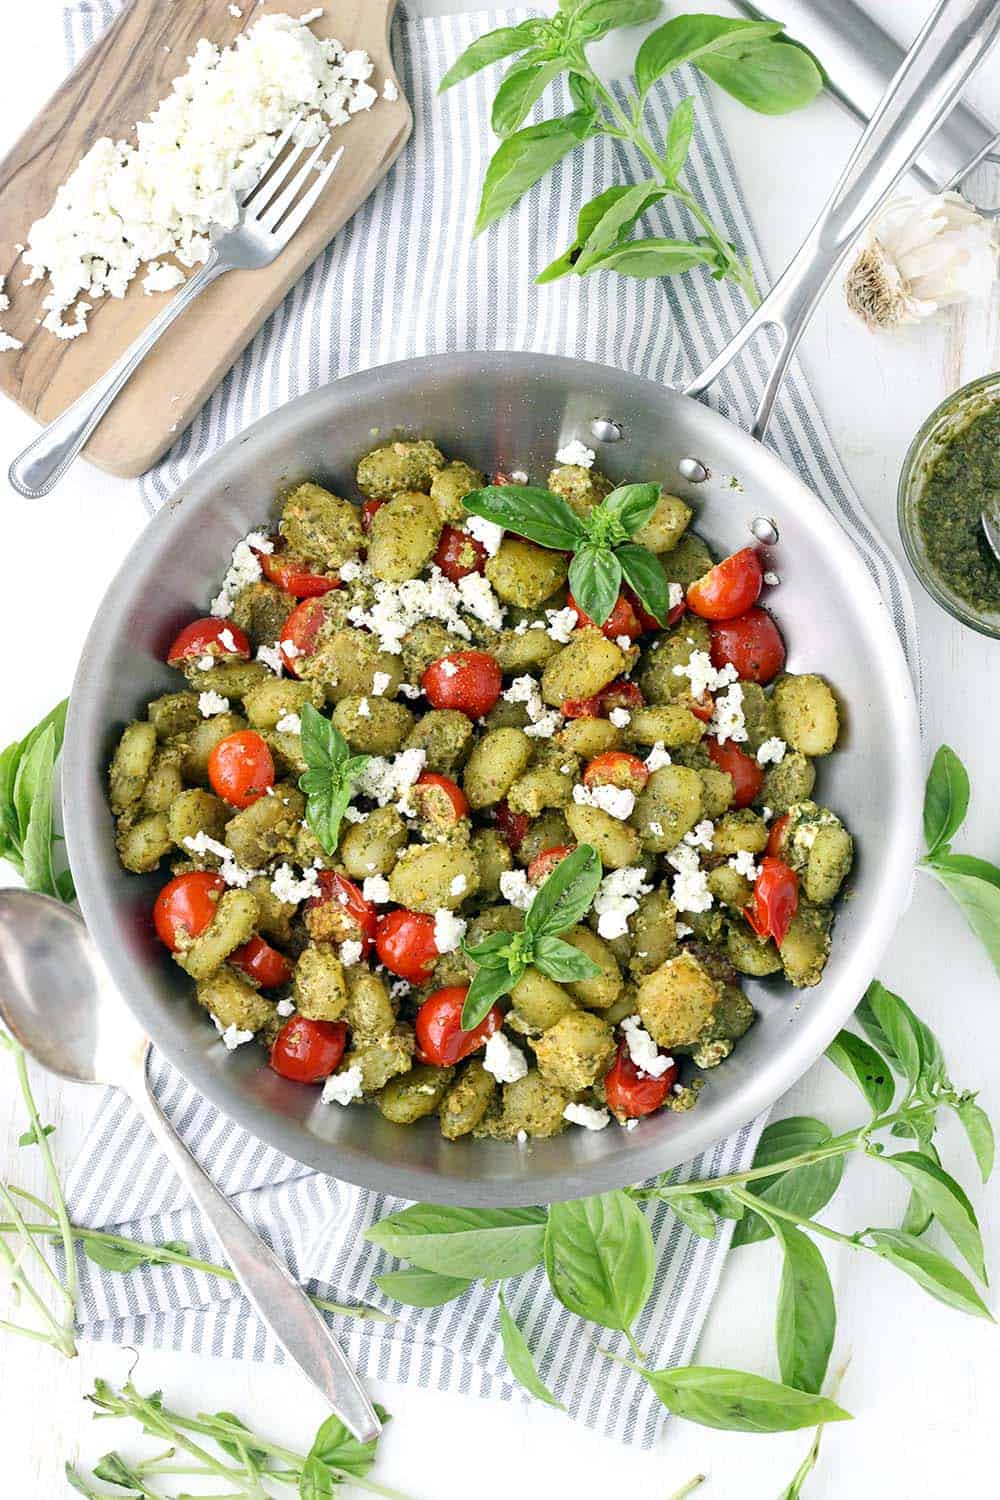 Pesto coated gnocchi with cherry tomatoes and goat cheese in a steel pan,  viewed from above.